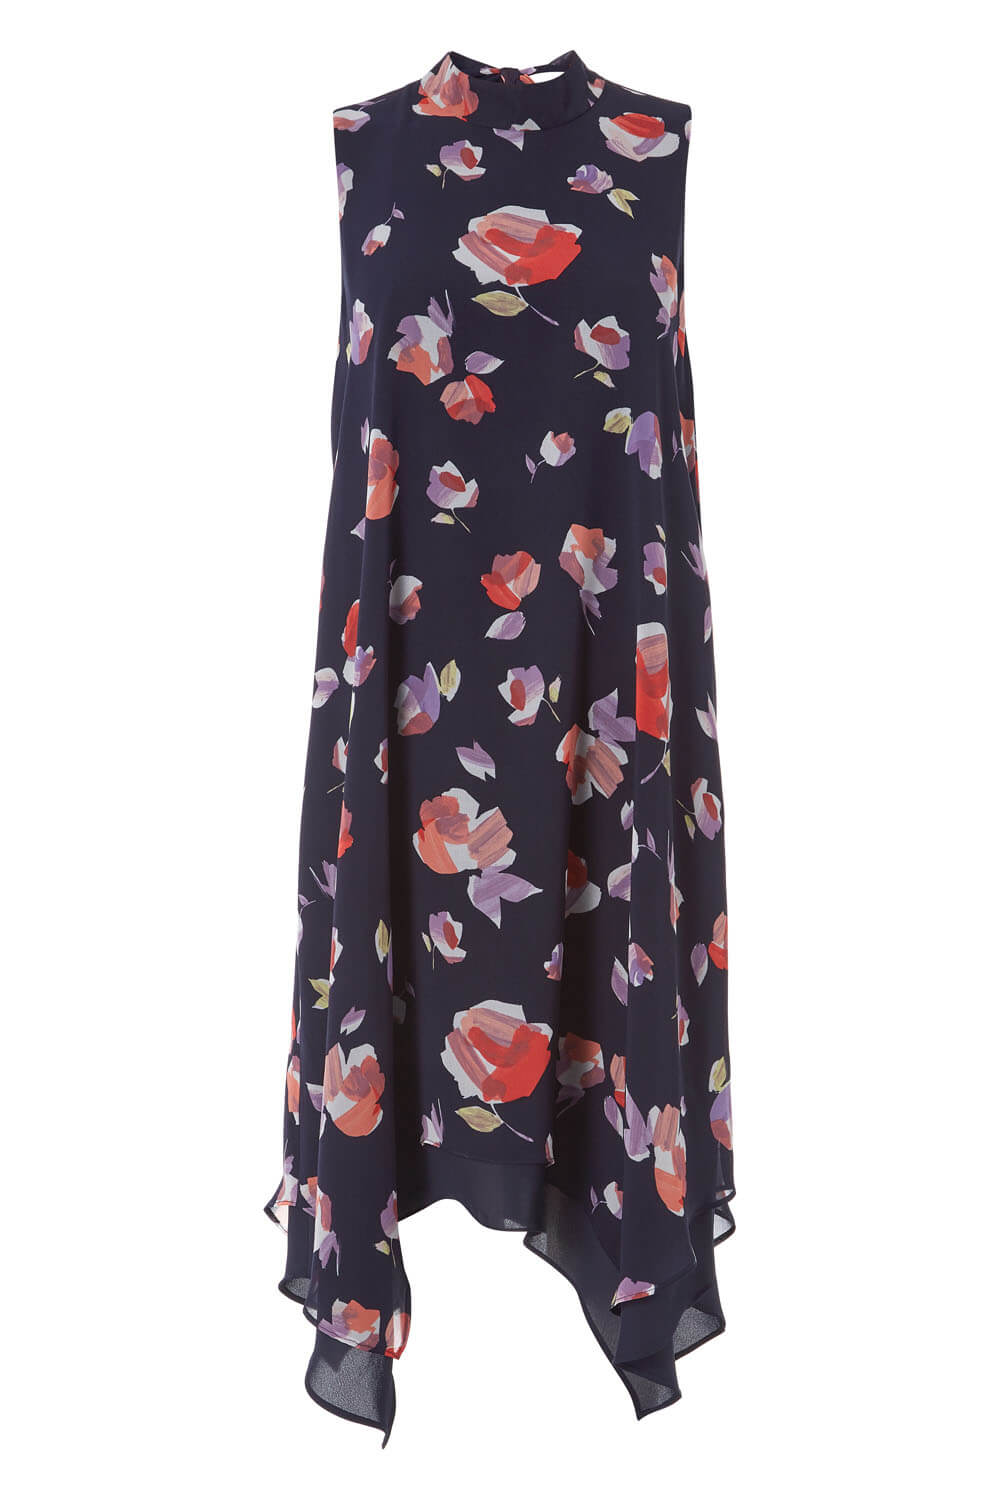 Navy  High Neck Floral Print Swing Dress, Image 5 of 5